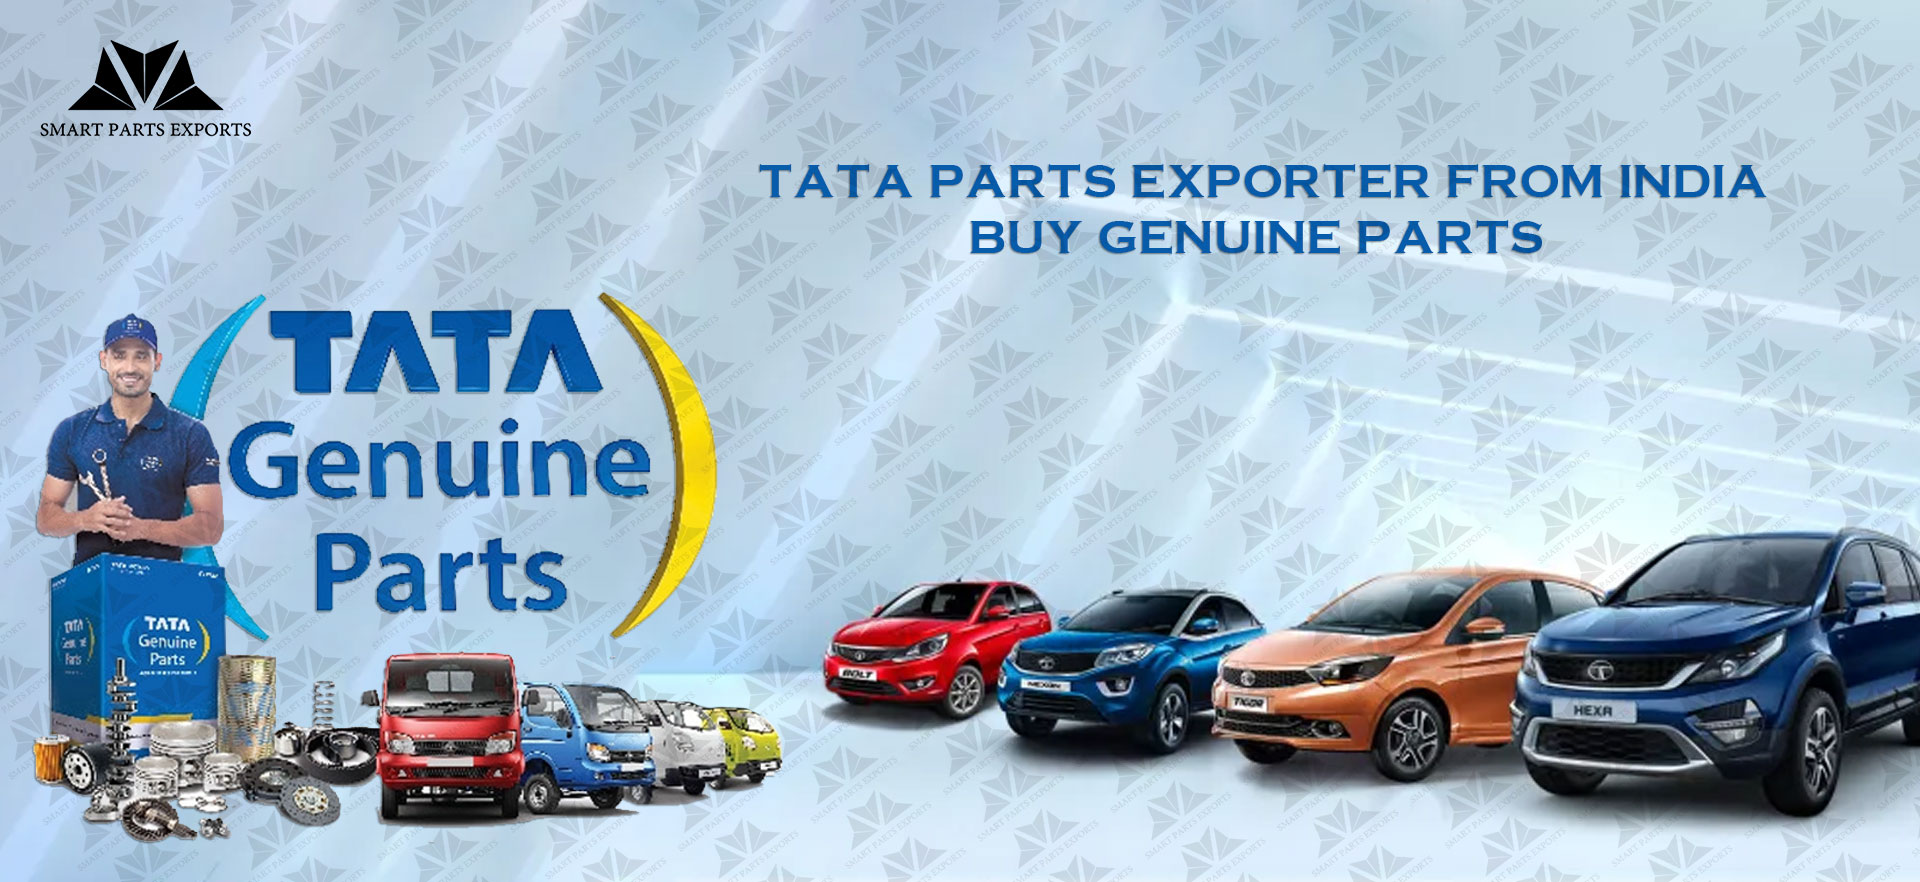 TATA Parts Exporter from India: Buy Genuine Parts 